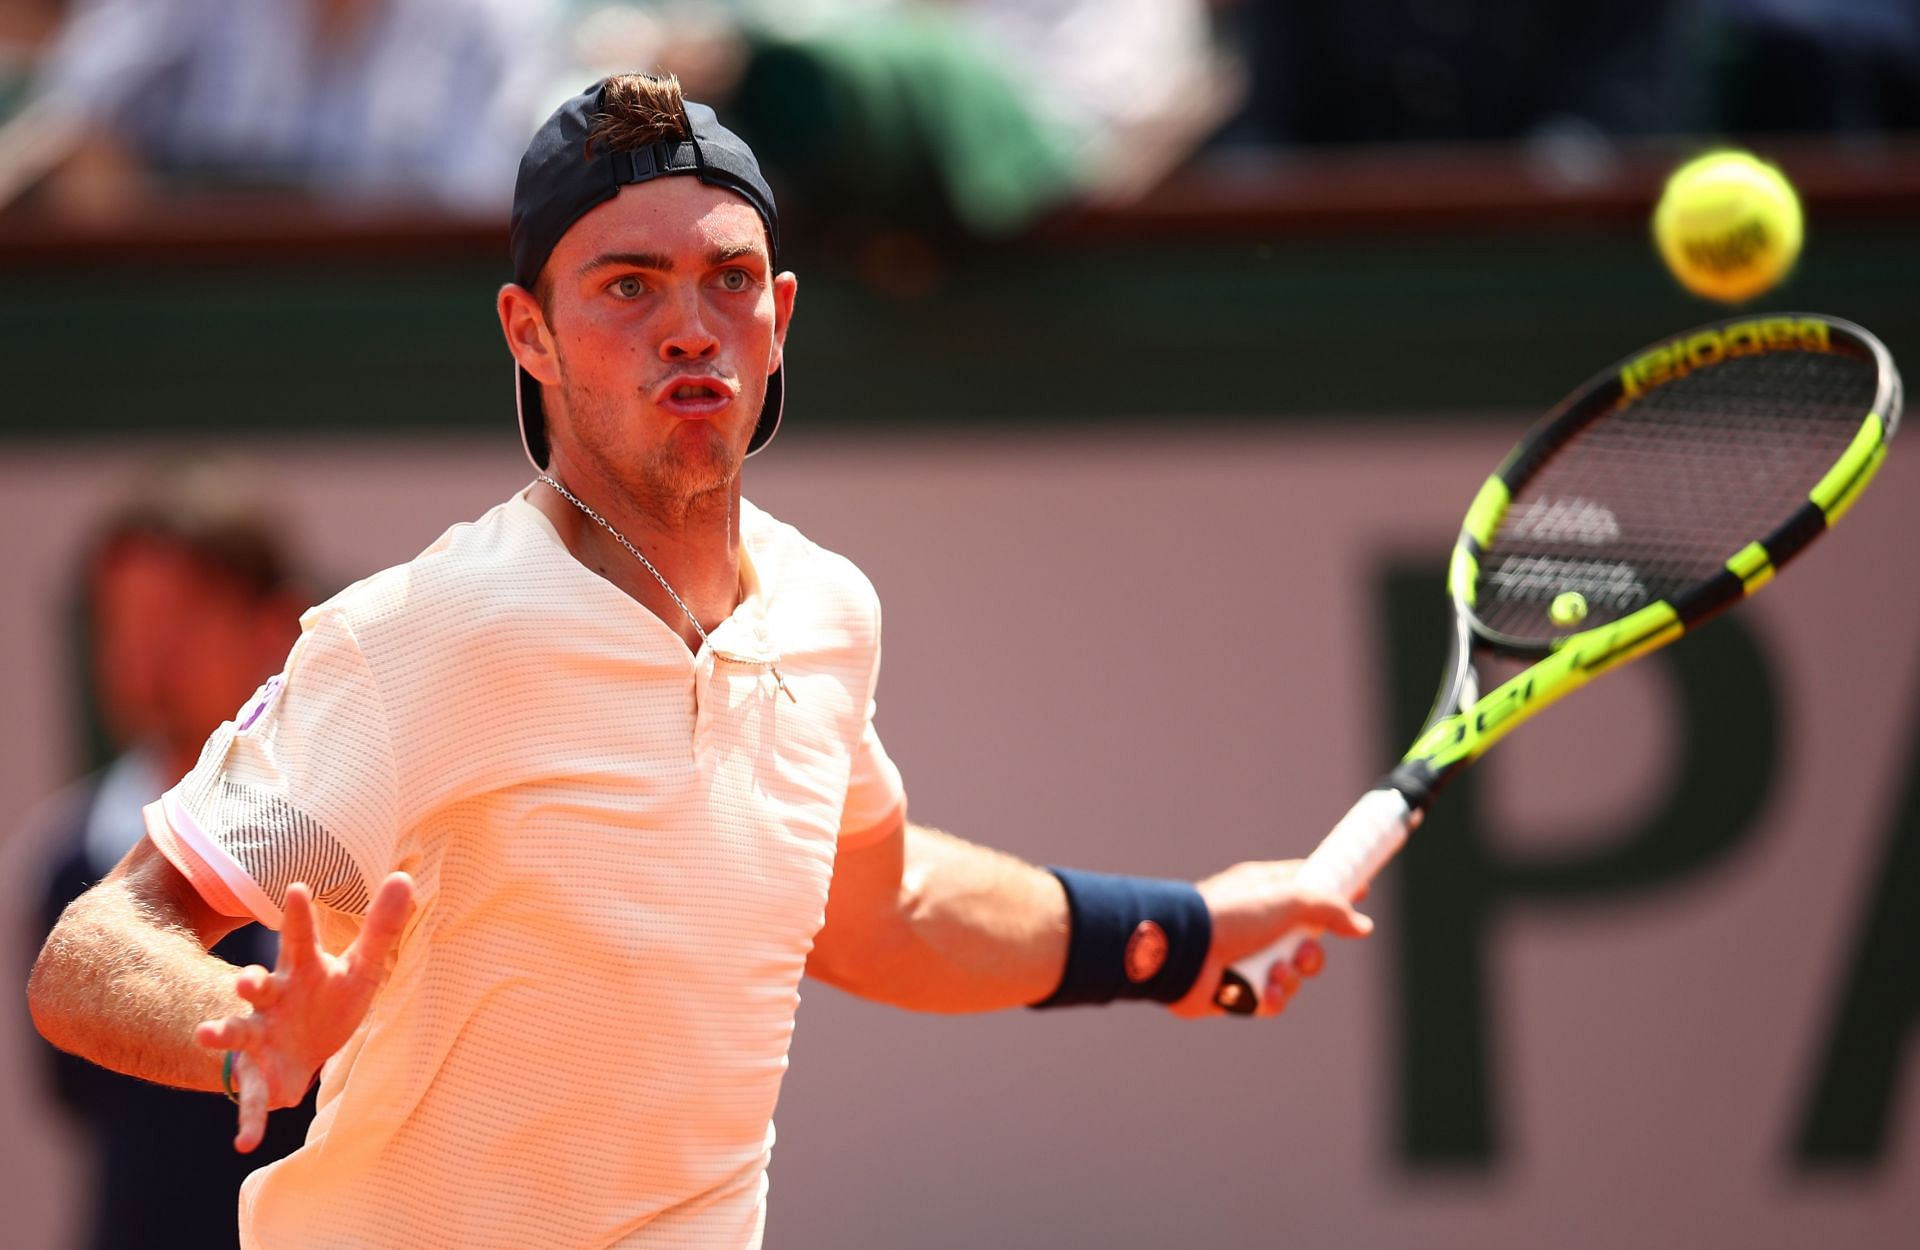 Maximilian Marterer faced Rafael Nadal in his maiden Grand Slam 4th-round appearance, at the 2018 French Open.